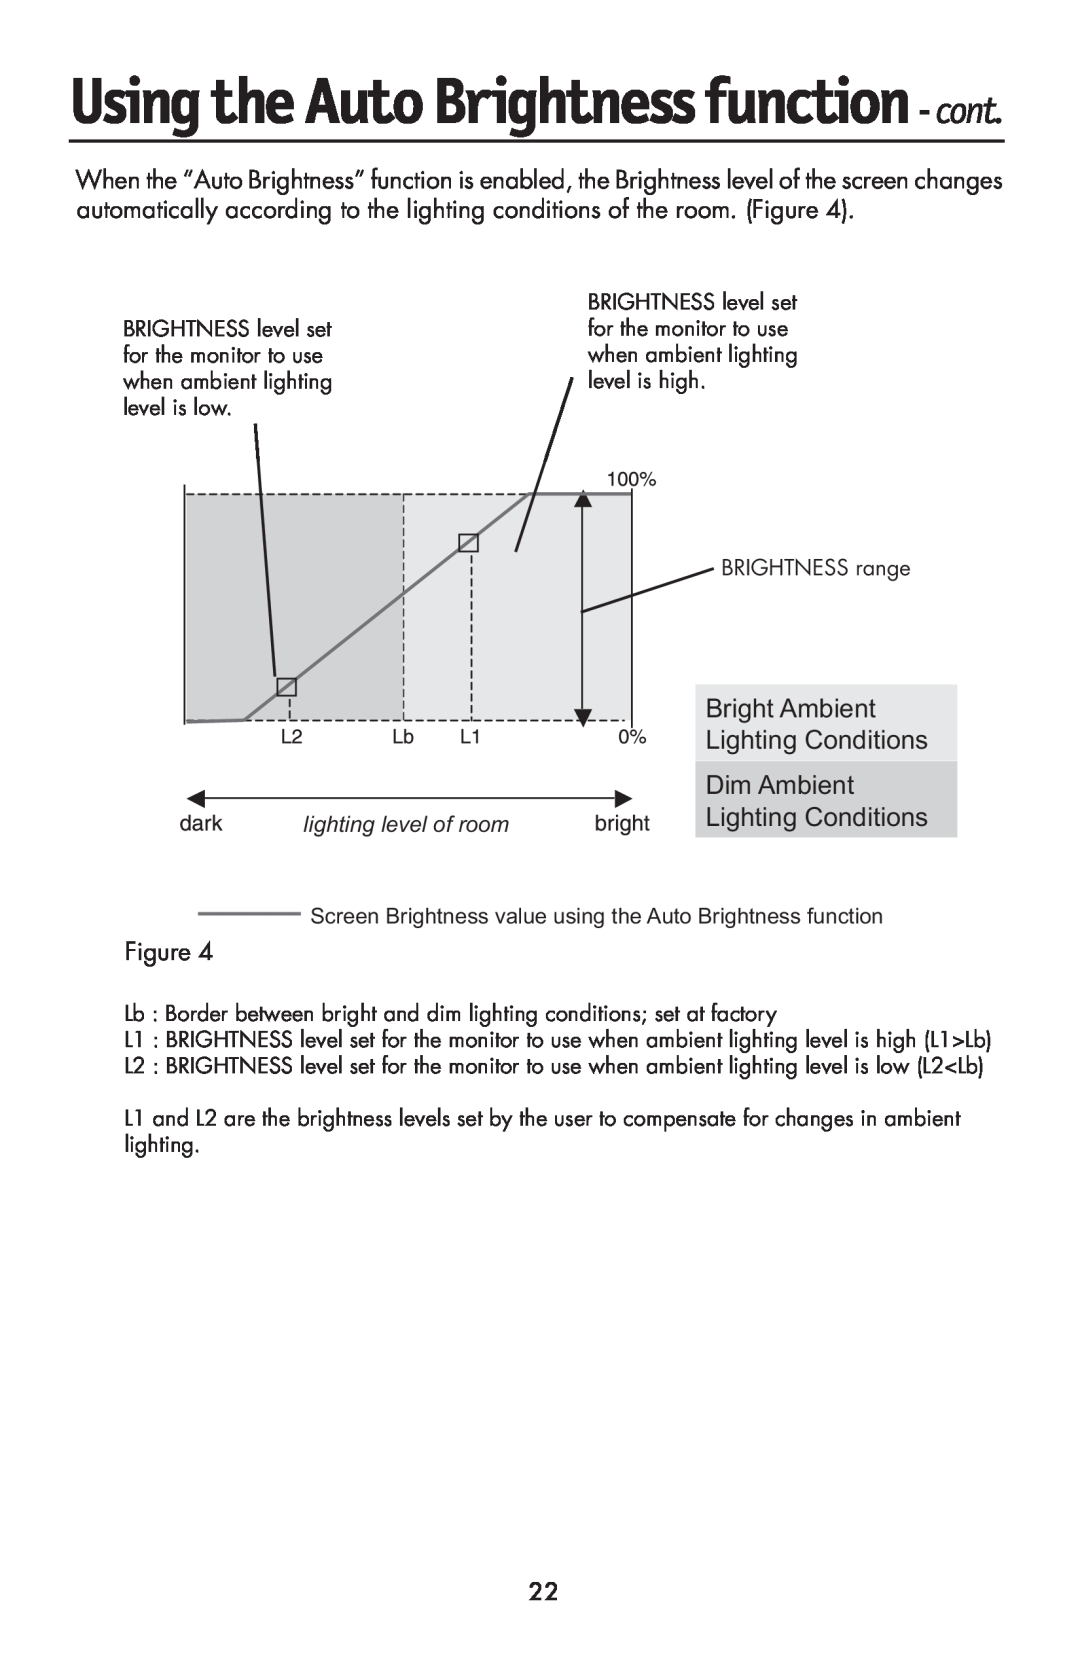 NEC LCD1990FXTM user manual Using the Auto Brightness function - cont, Dim Ambient, Bright Ambient Lighting Conditions 